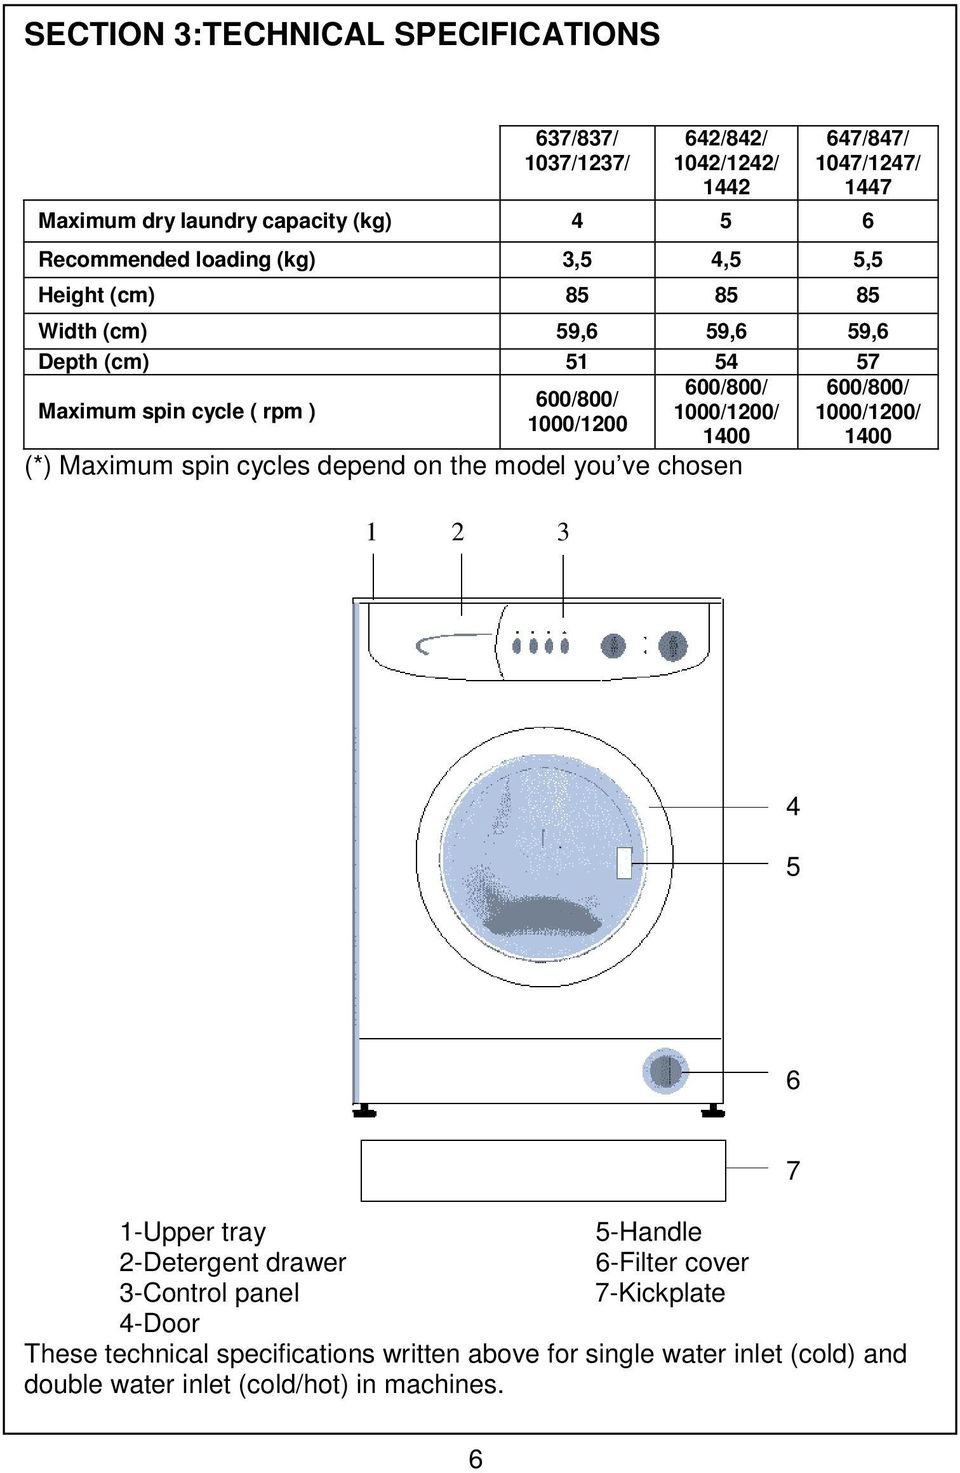 1000/1200/ 1000/1200 1400 1400 (*) Maximum spin cycles depend on the model you ve chosen 1 2 3 4 5 6 1-Upper tray 5-Handle 2-Detergent drawer 6-Filter cover